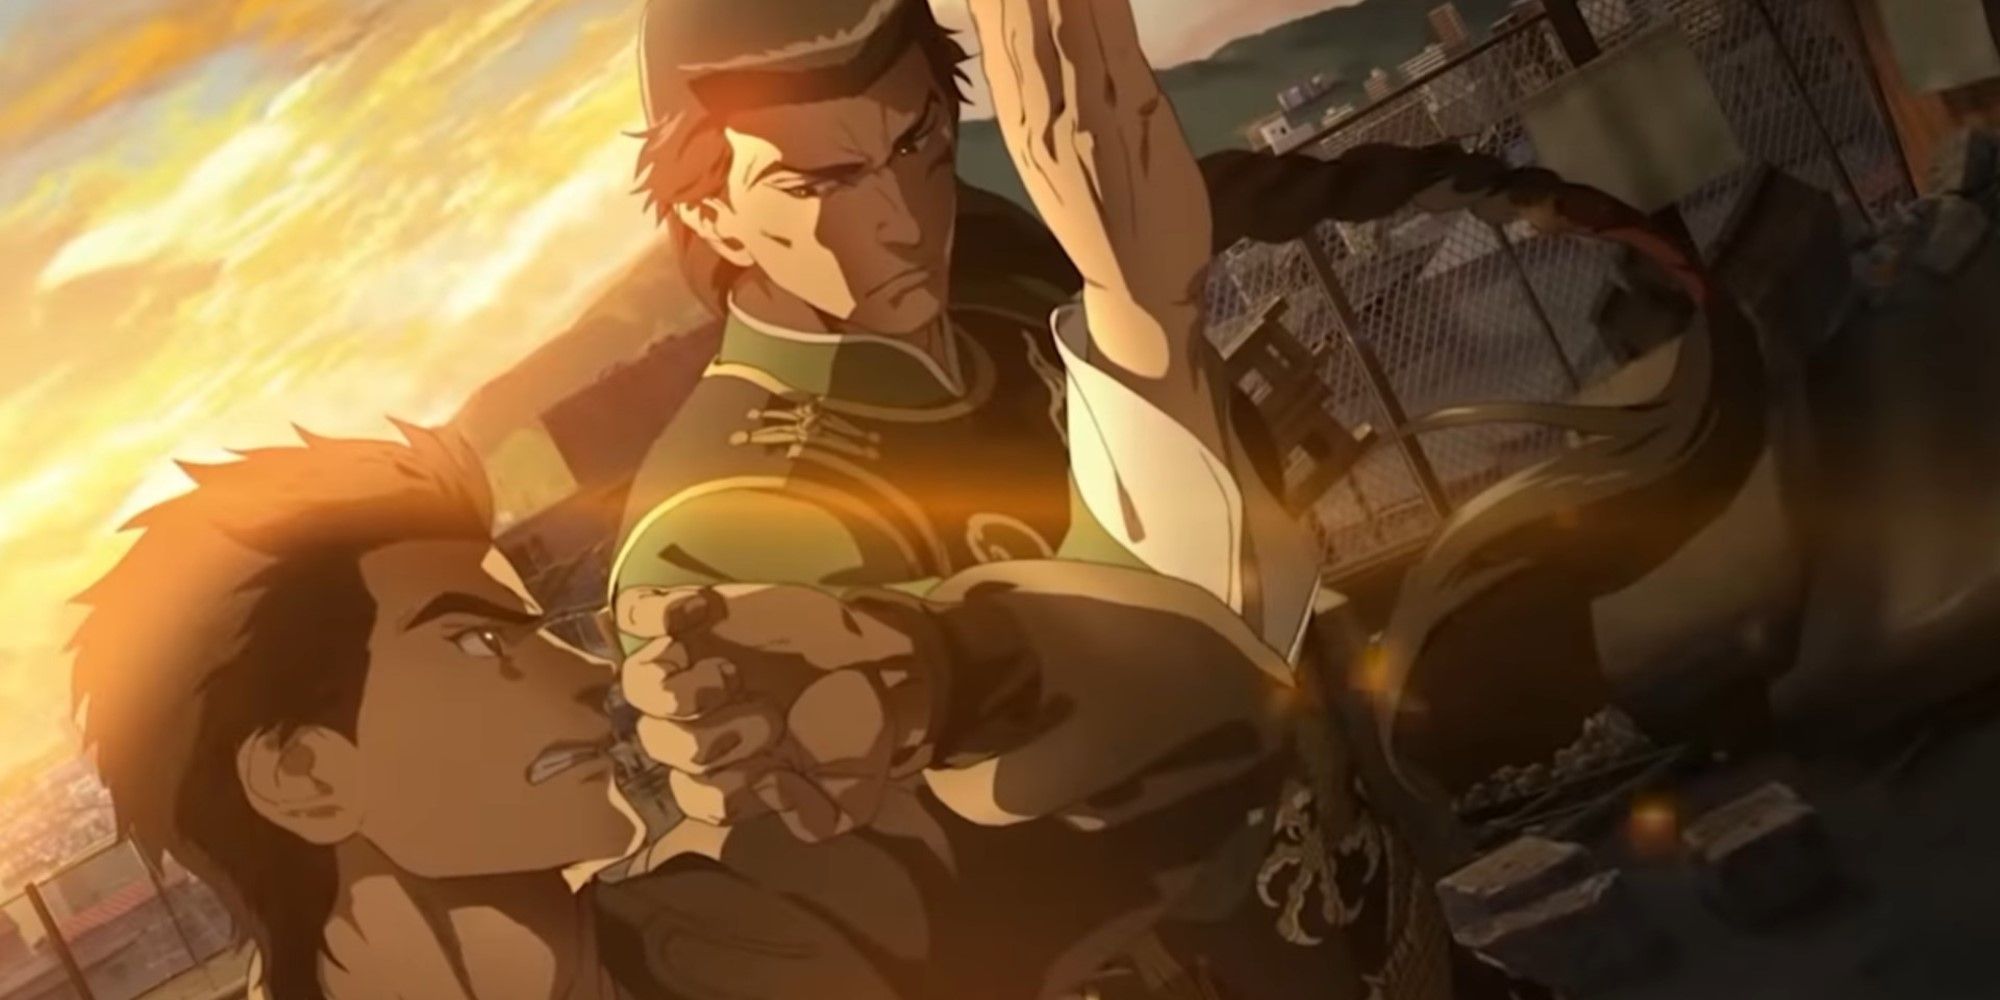 Before The Shenmue Anime You Should Watch The Virtua Fighter Anime